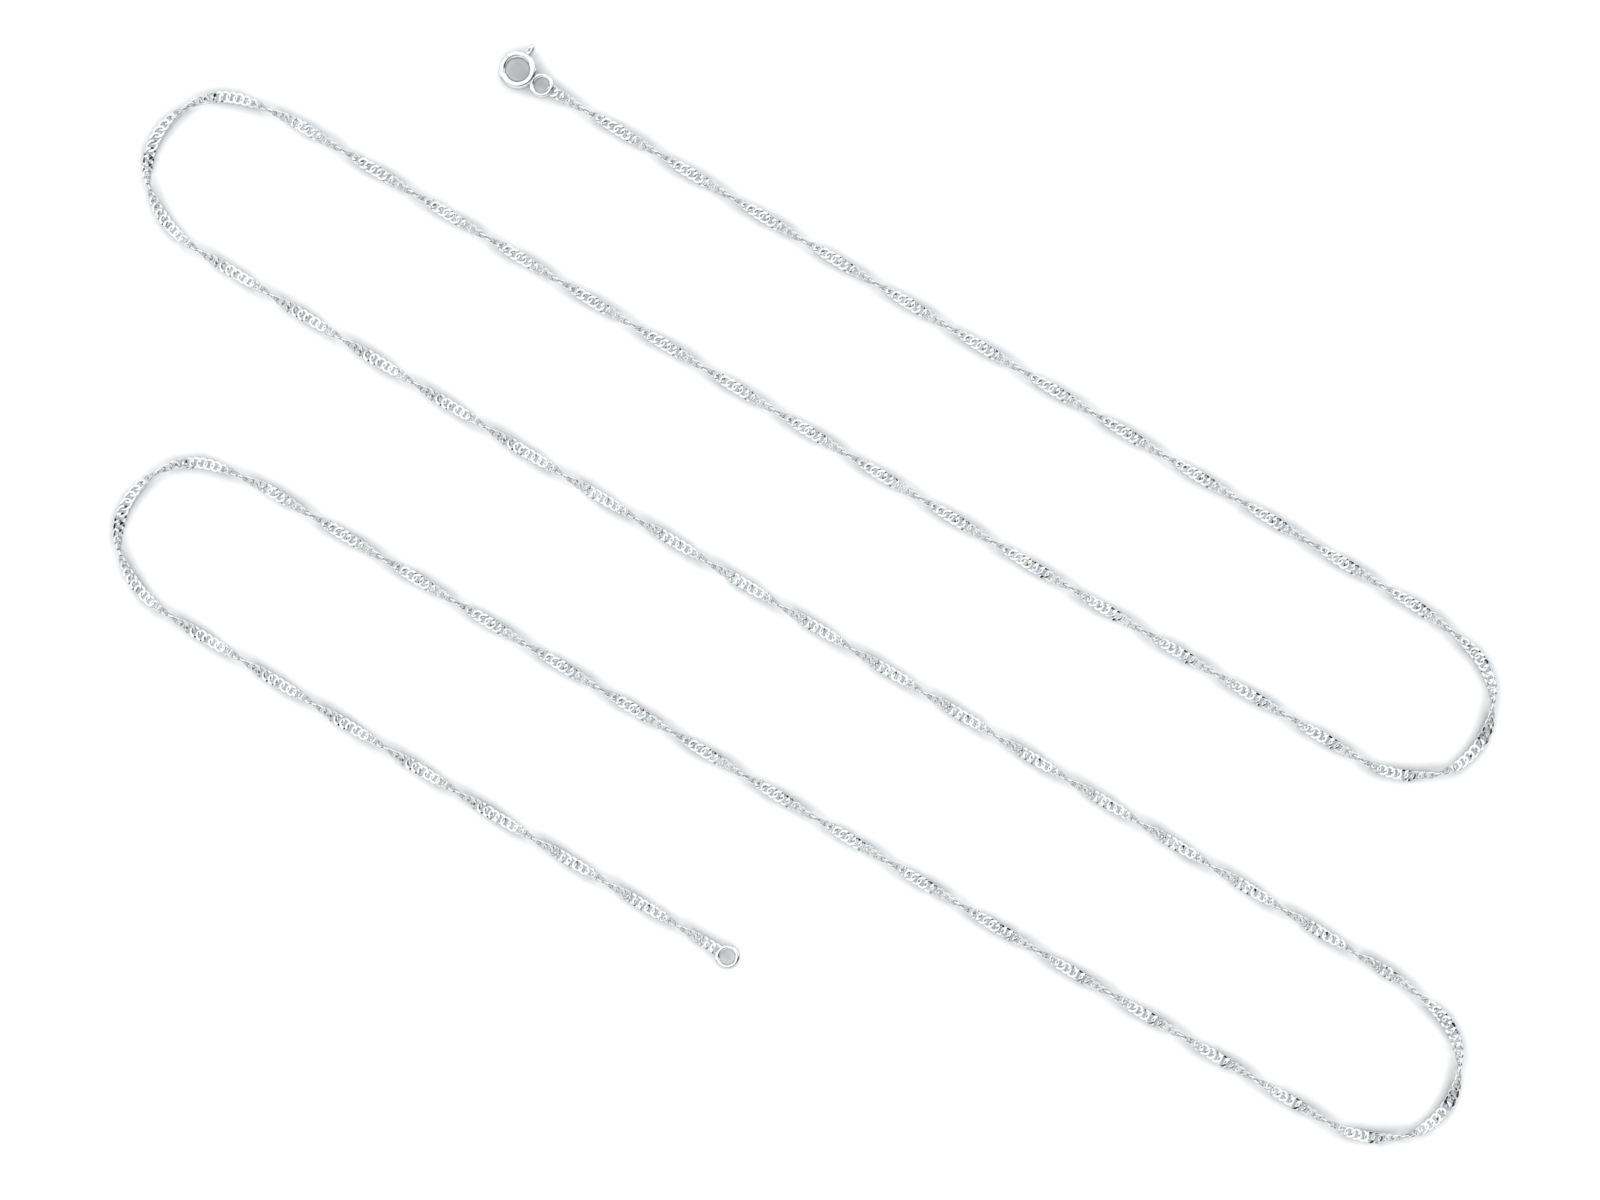 Robe (2mm) Sterling Silver Chain, 18", 20", 24", 30"